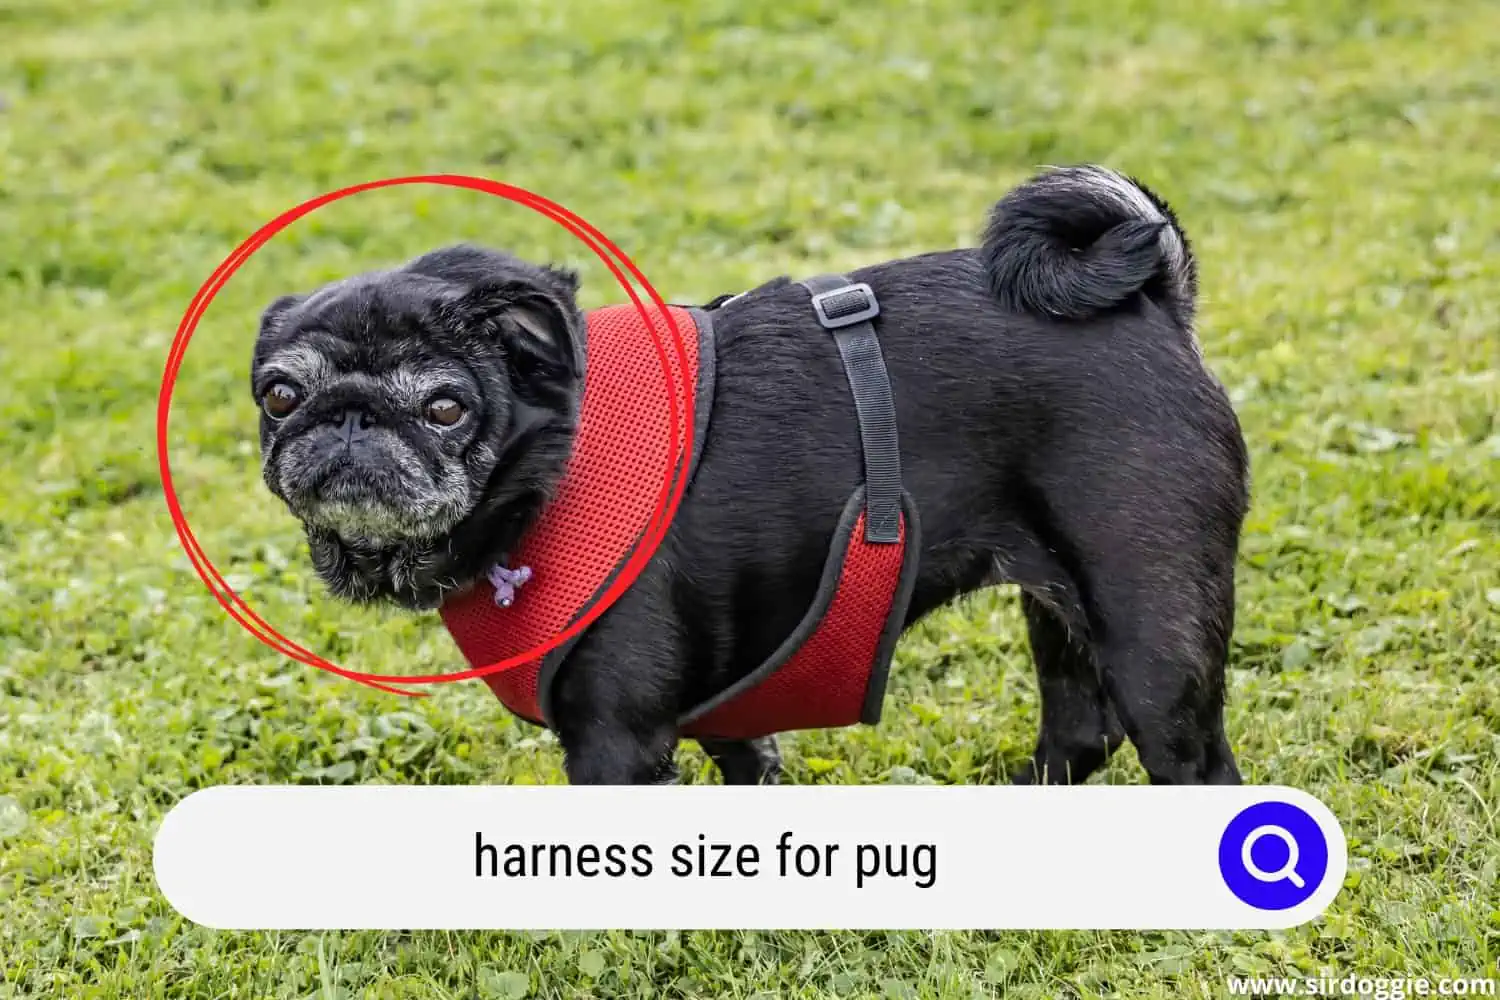 harness size for pug